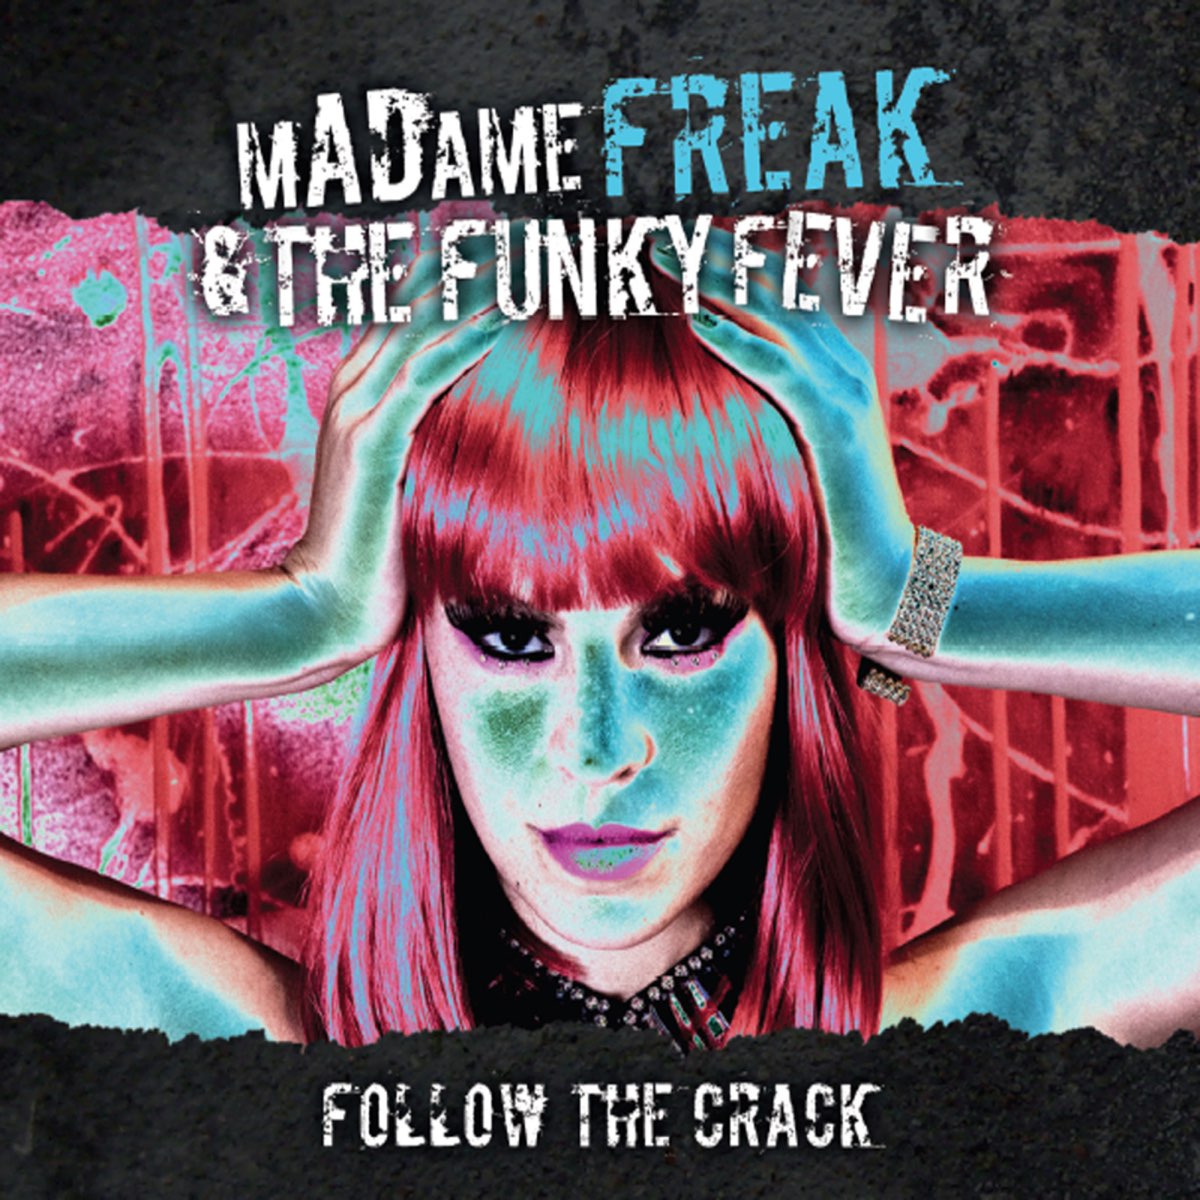 Im a freak. Freaky Funky. Мадам хаос.. Madame Freak and the Funky Fever - Bouriel -.